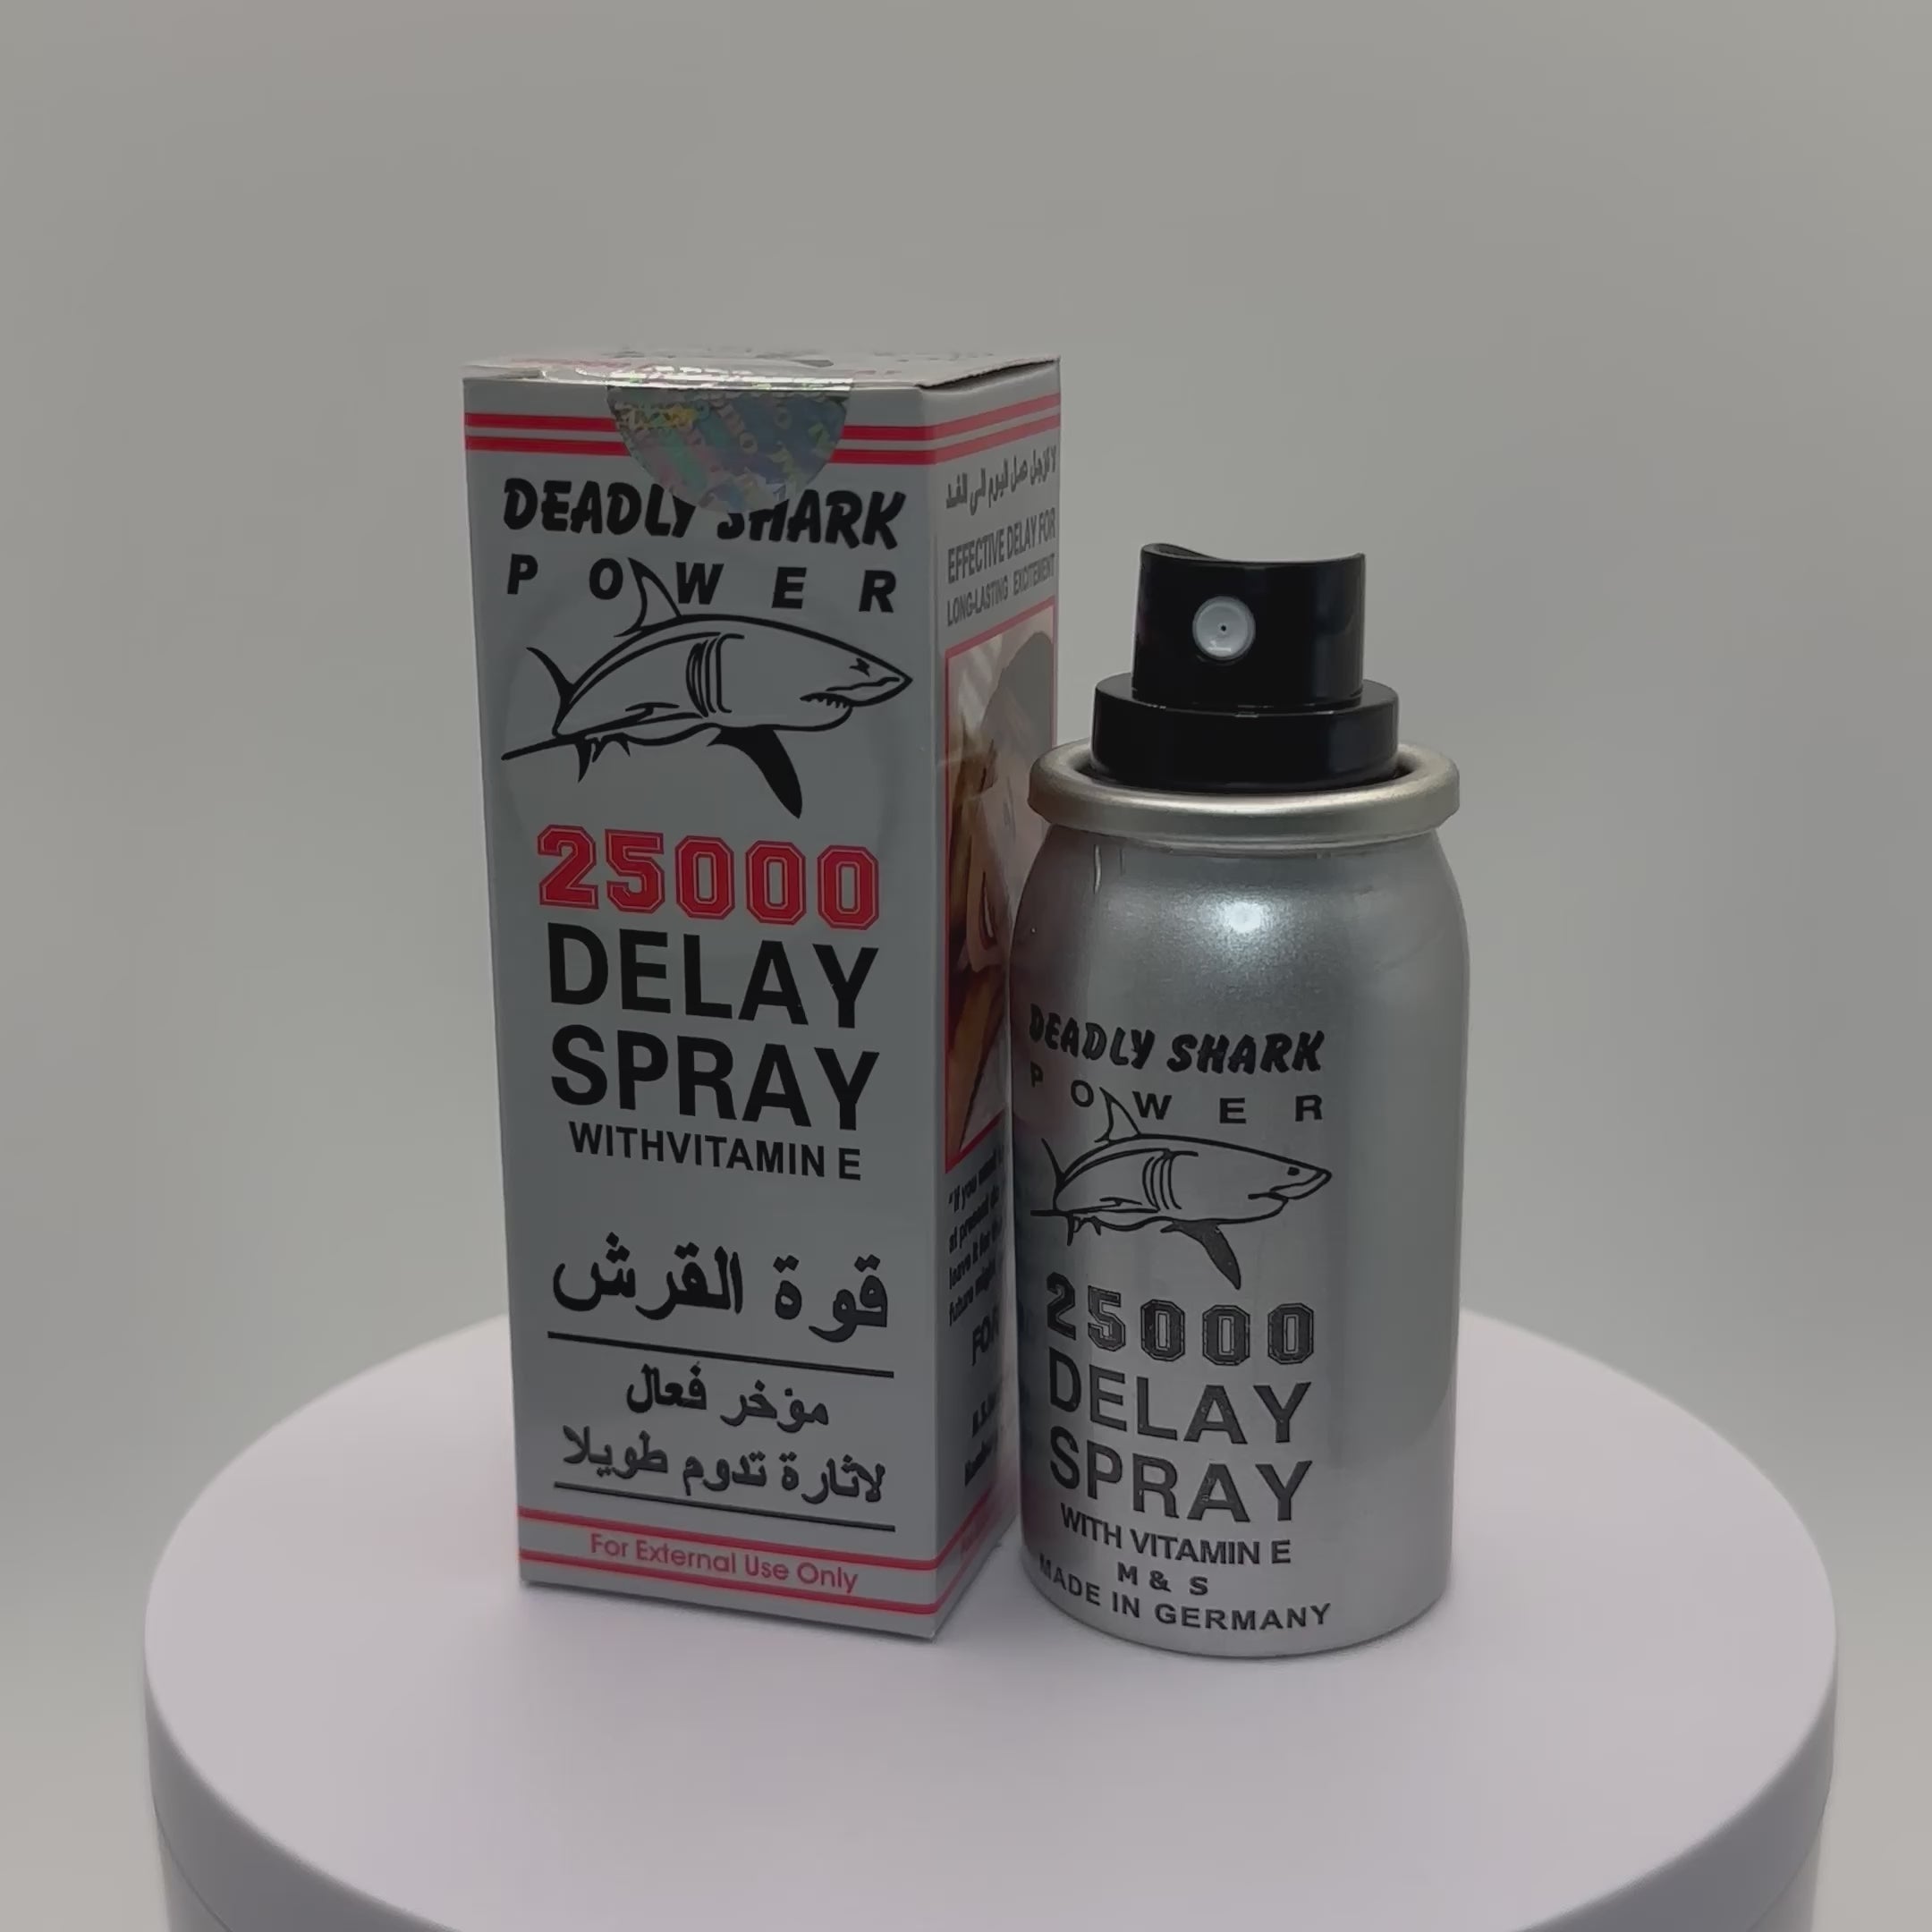 Load video: deadly shark power 25000 delay spray with vitamin e for men 45ml video